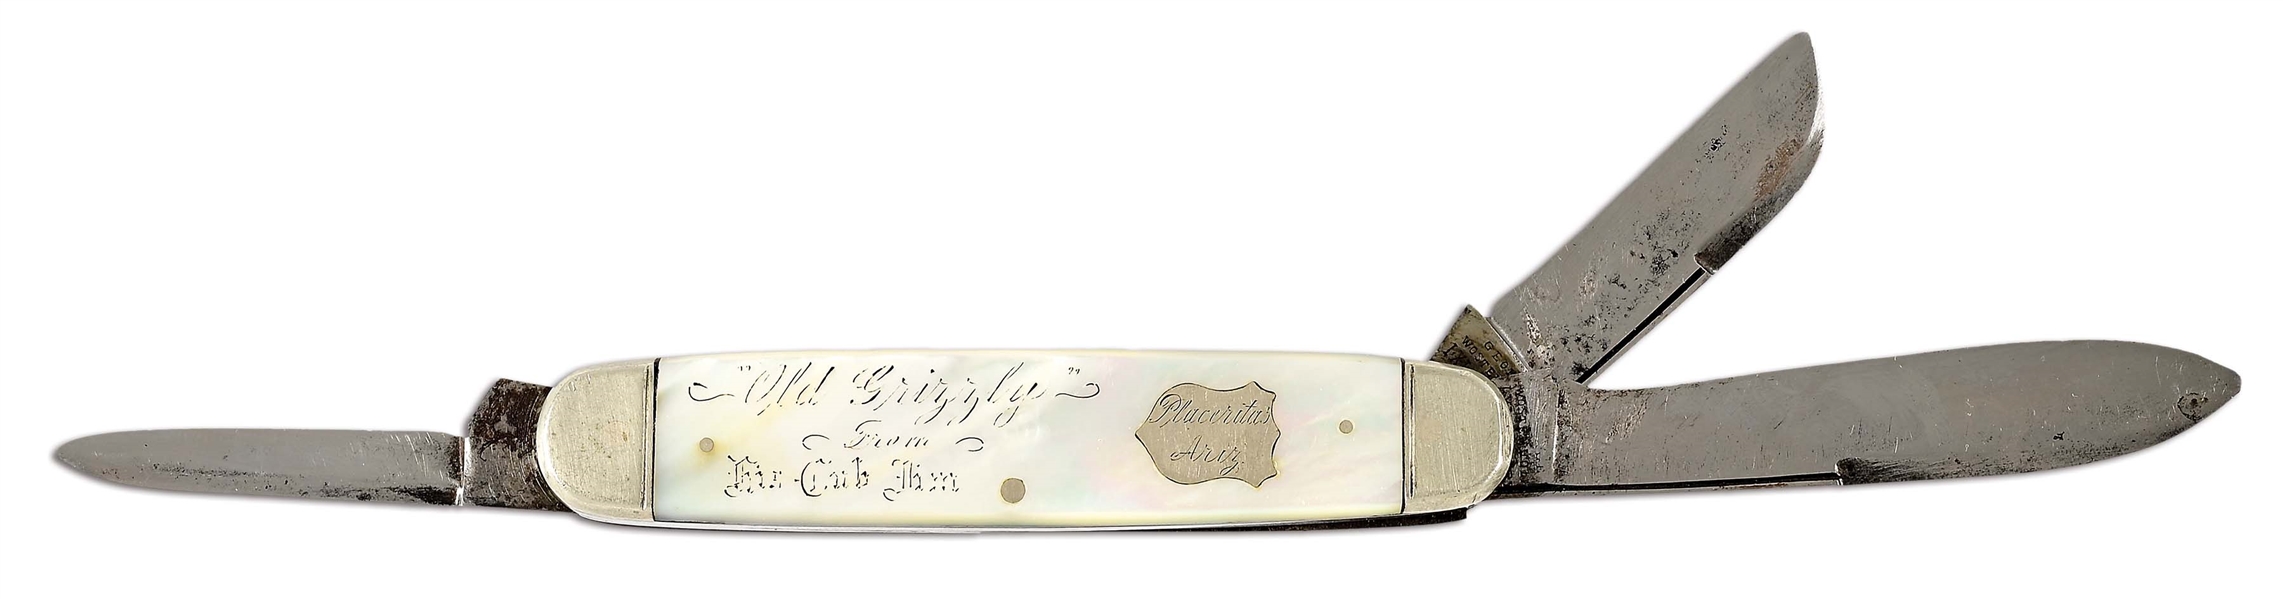 PEARL HANDLED CATTLE KNIFE WITH INTRIGUING INSCRIPTION BY GEO. WOSTENHOLM, SHEFFIELD.